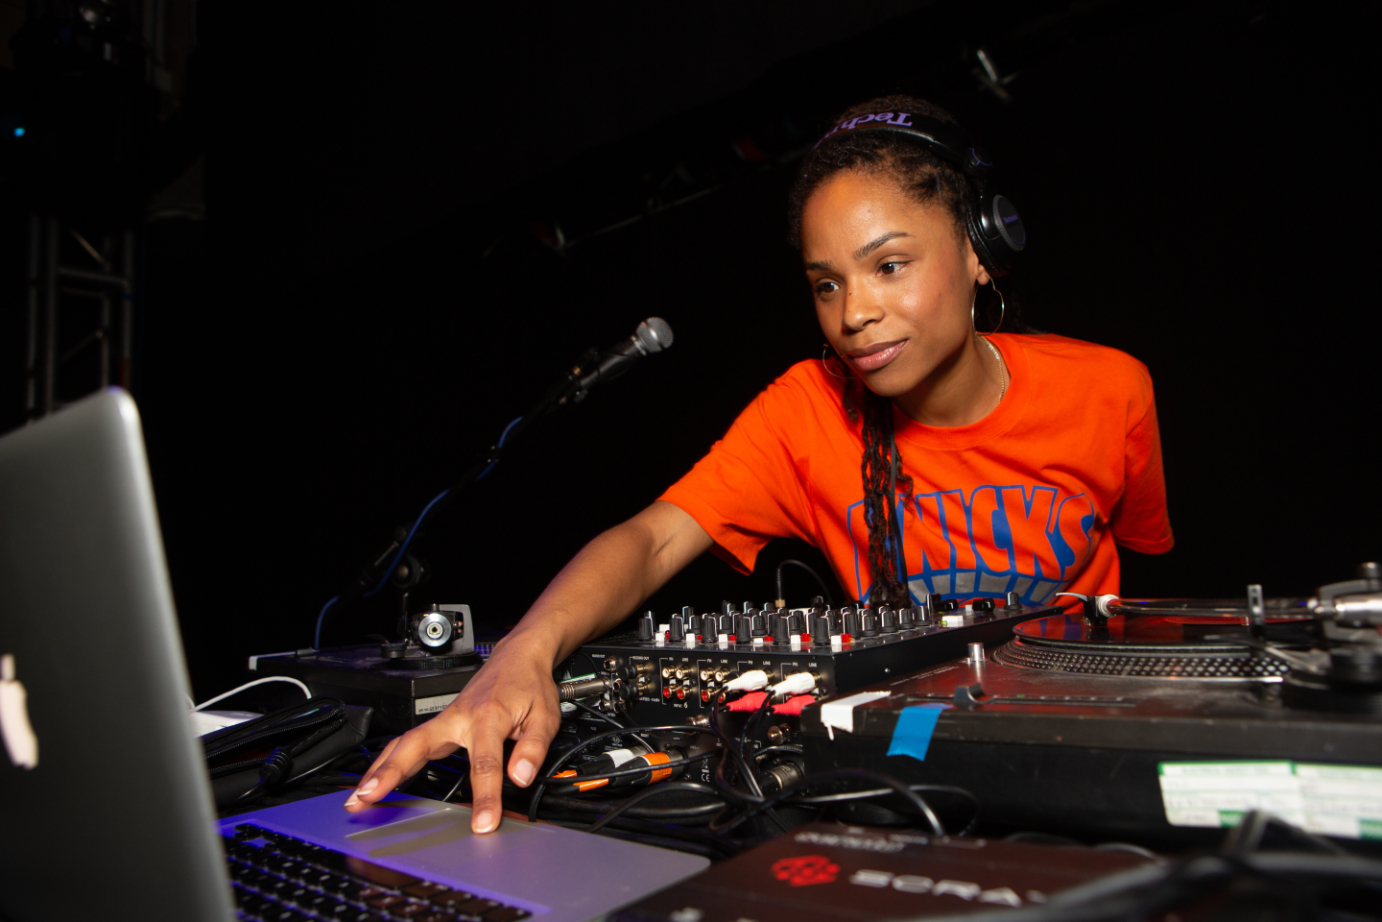 DJ Sarah Love playing at the Breakin’ Convention after party